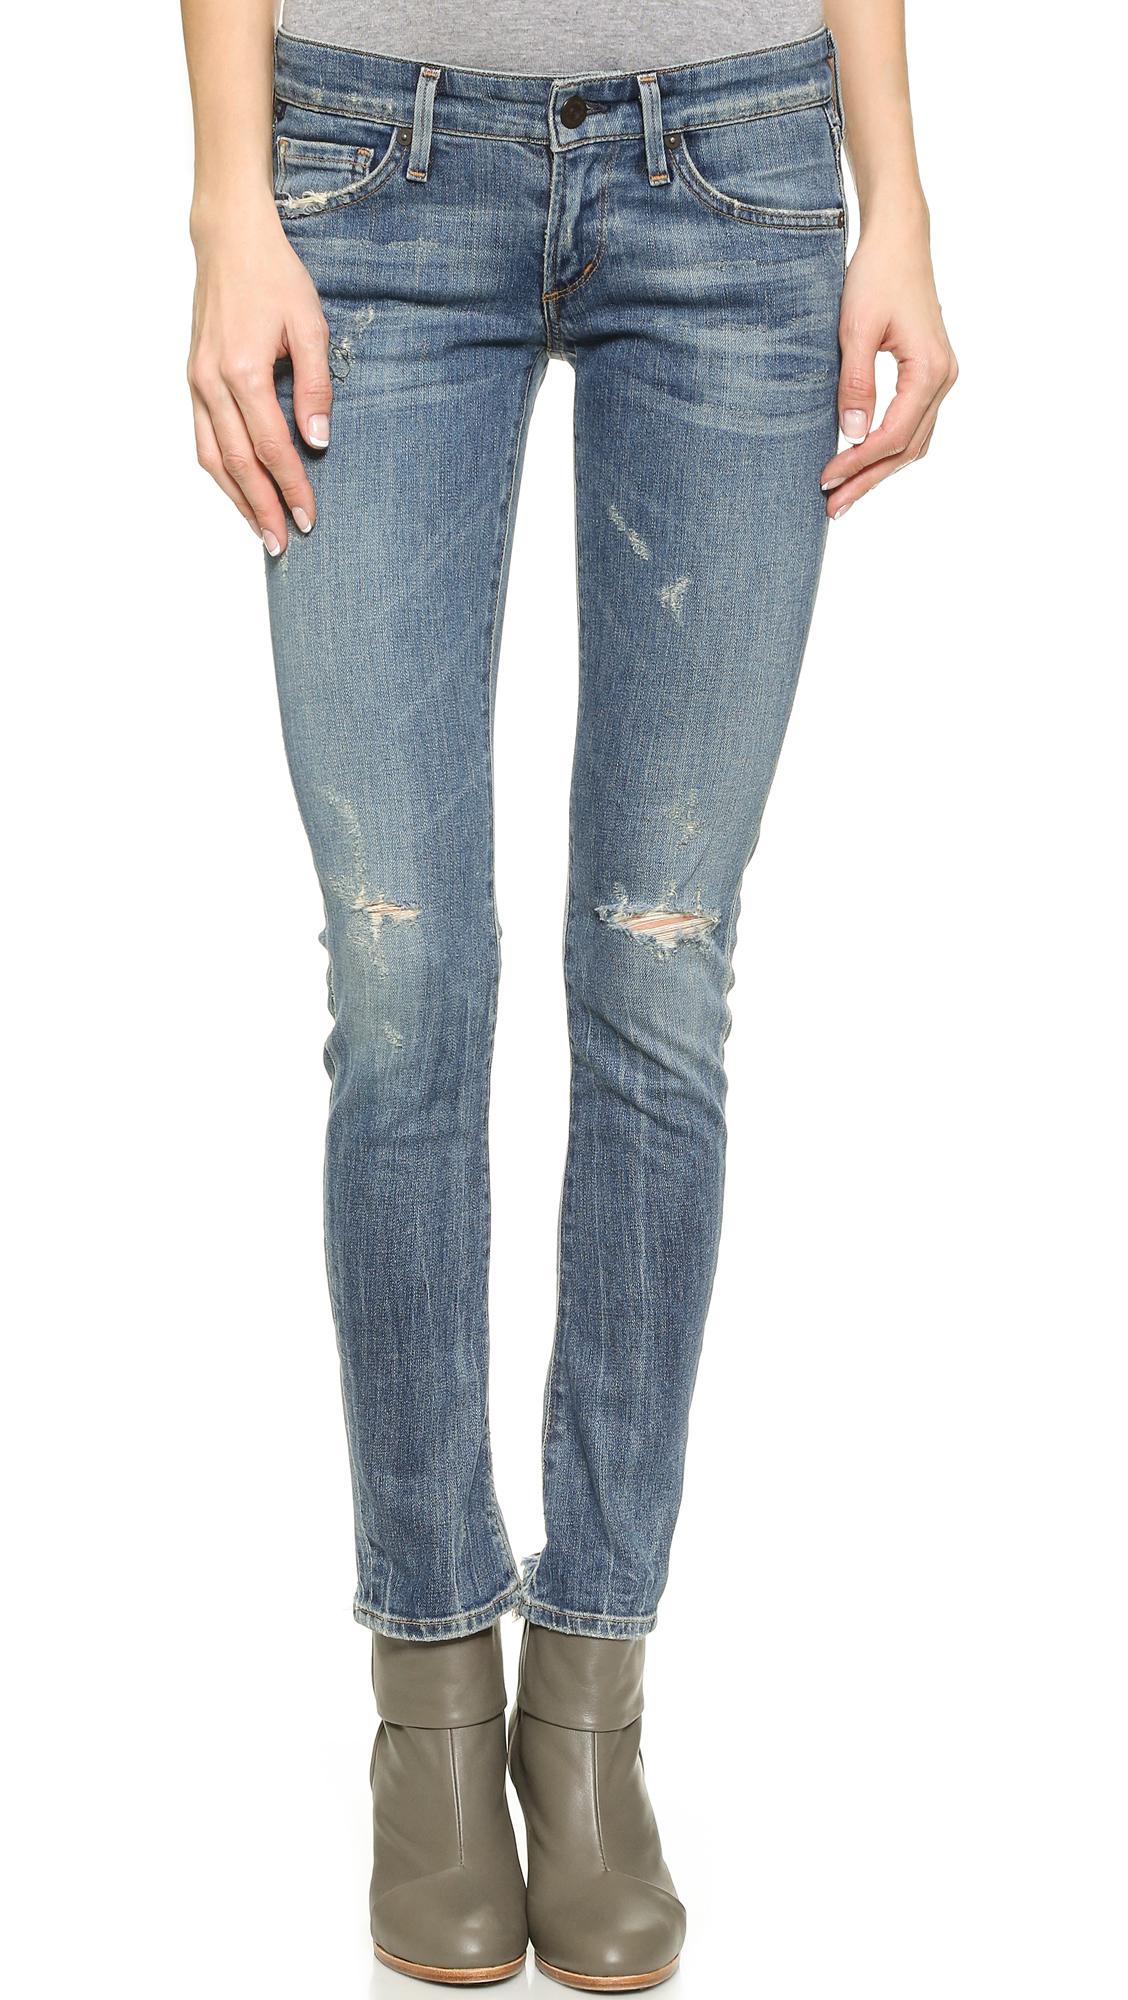 citizens of humanity racer skinny jeans